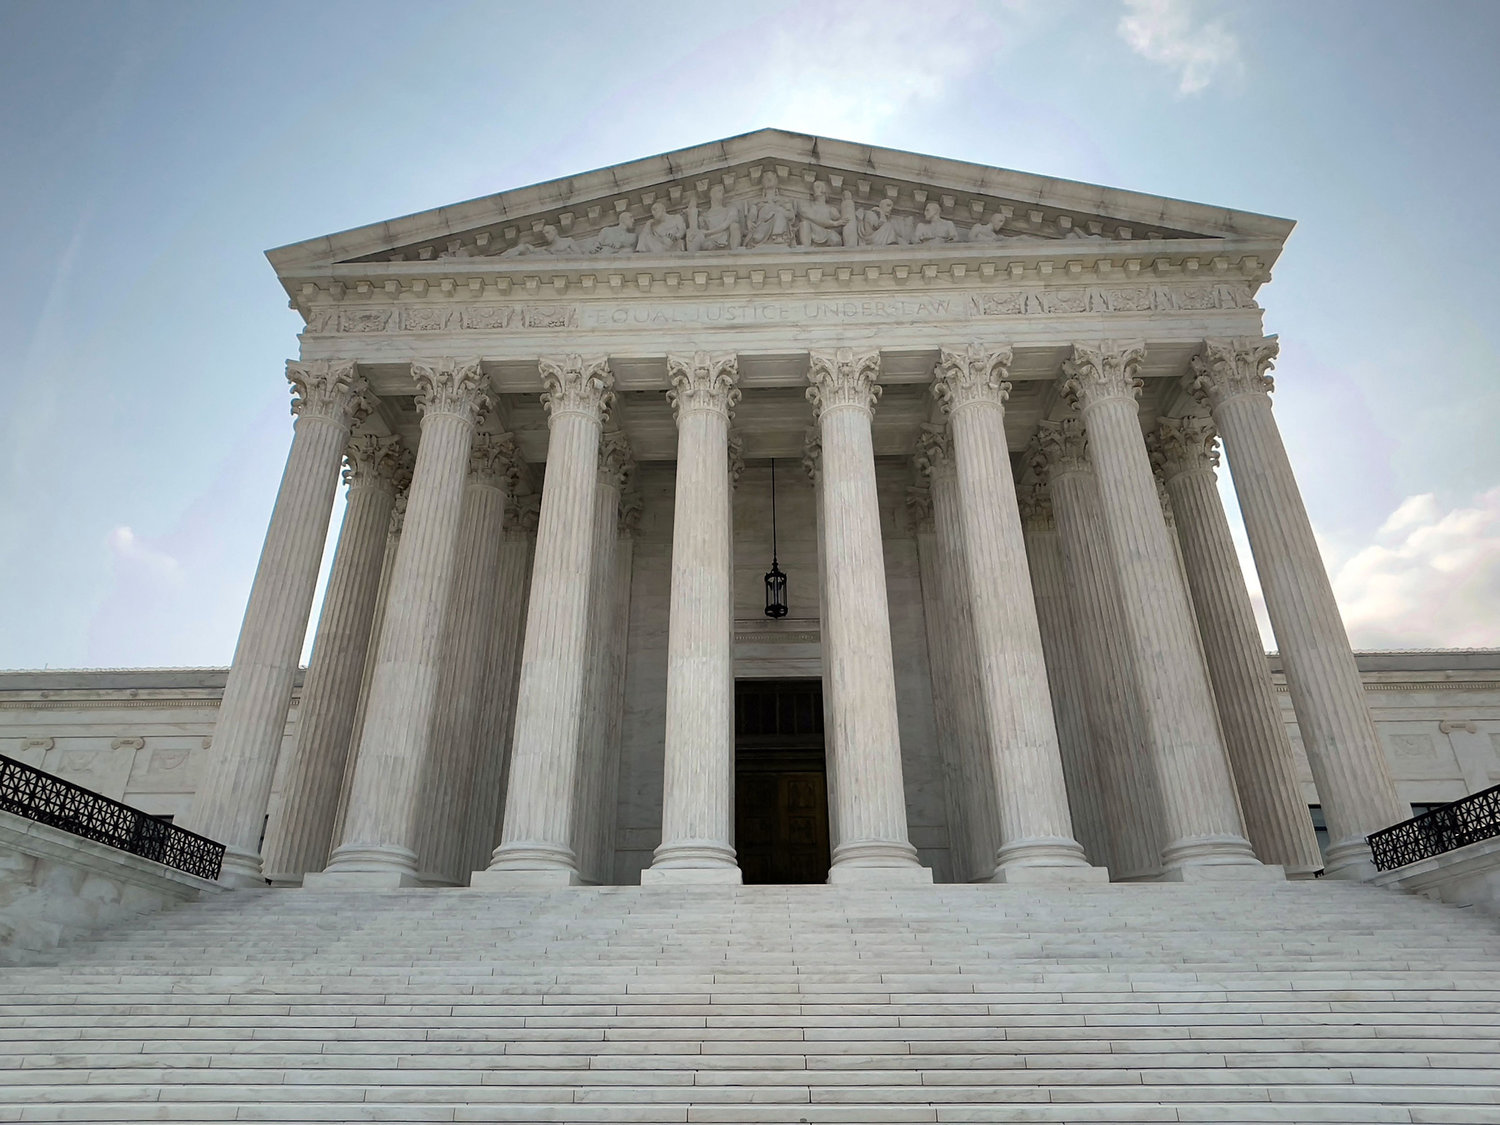 The U.S. Supreme Court building as seen on Sunday, July 11, 2021, in Washington, D.C. (Daniel Slim/AFP/Getty Images/TNS)